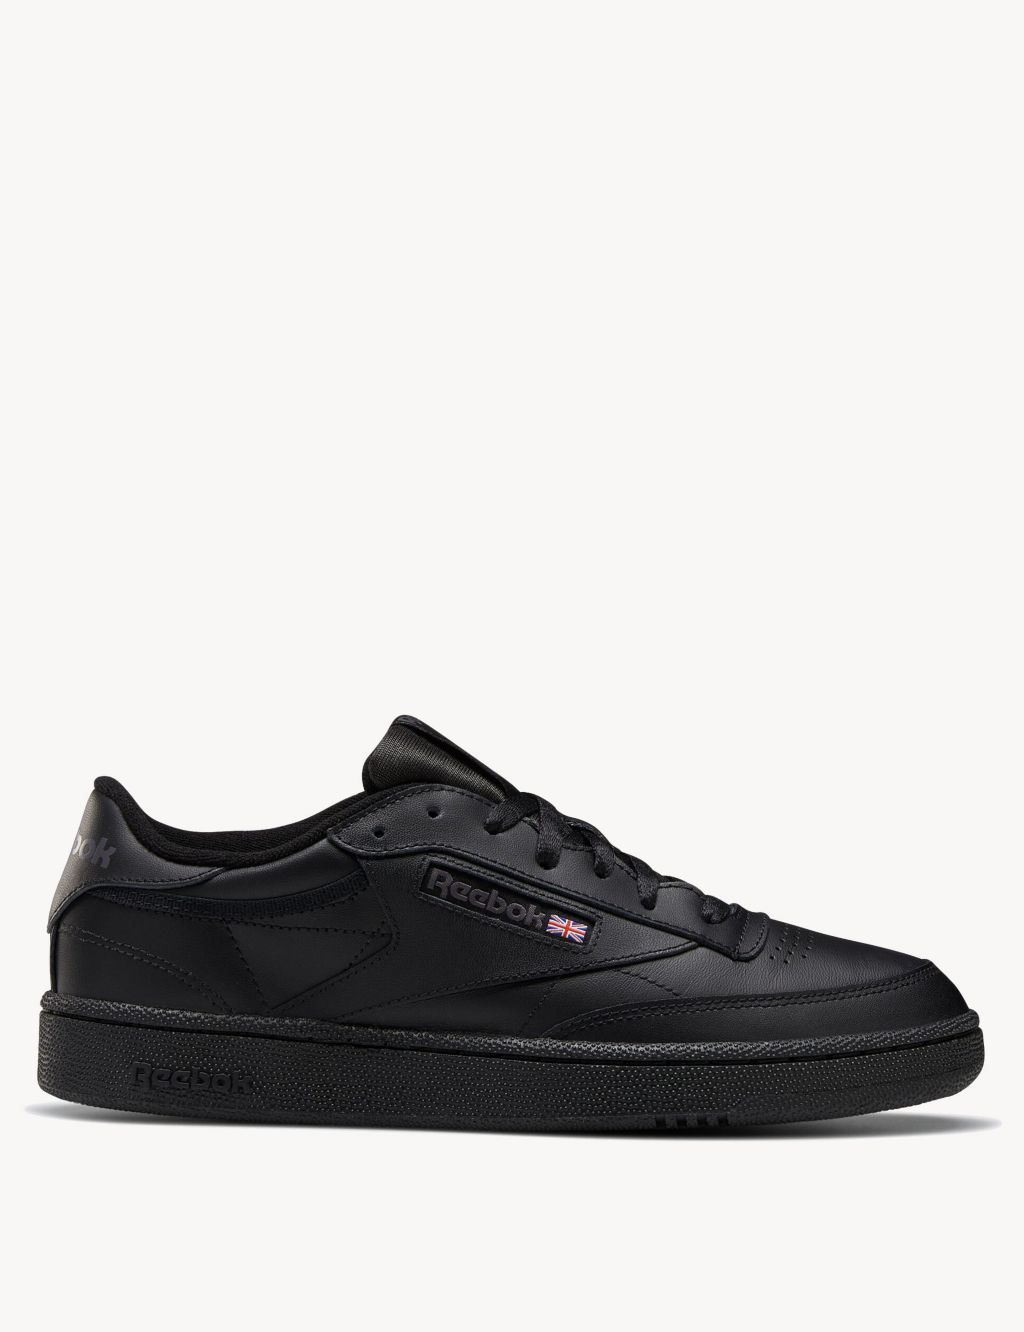 Club C 85 Leather Lace Up Trainers